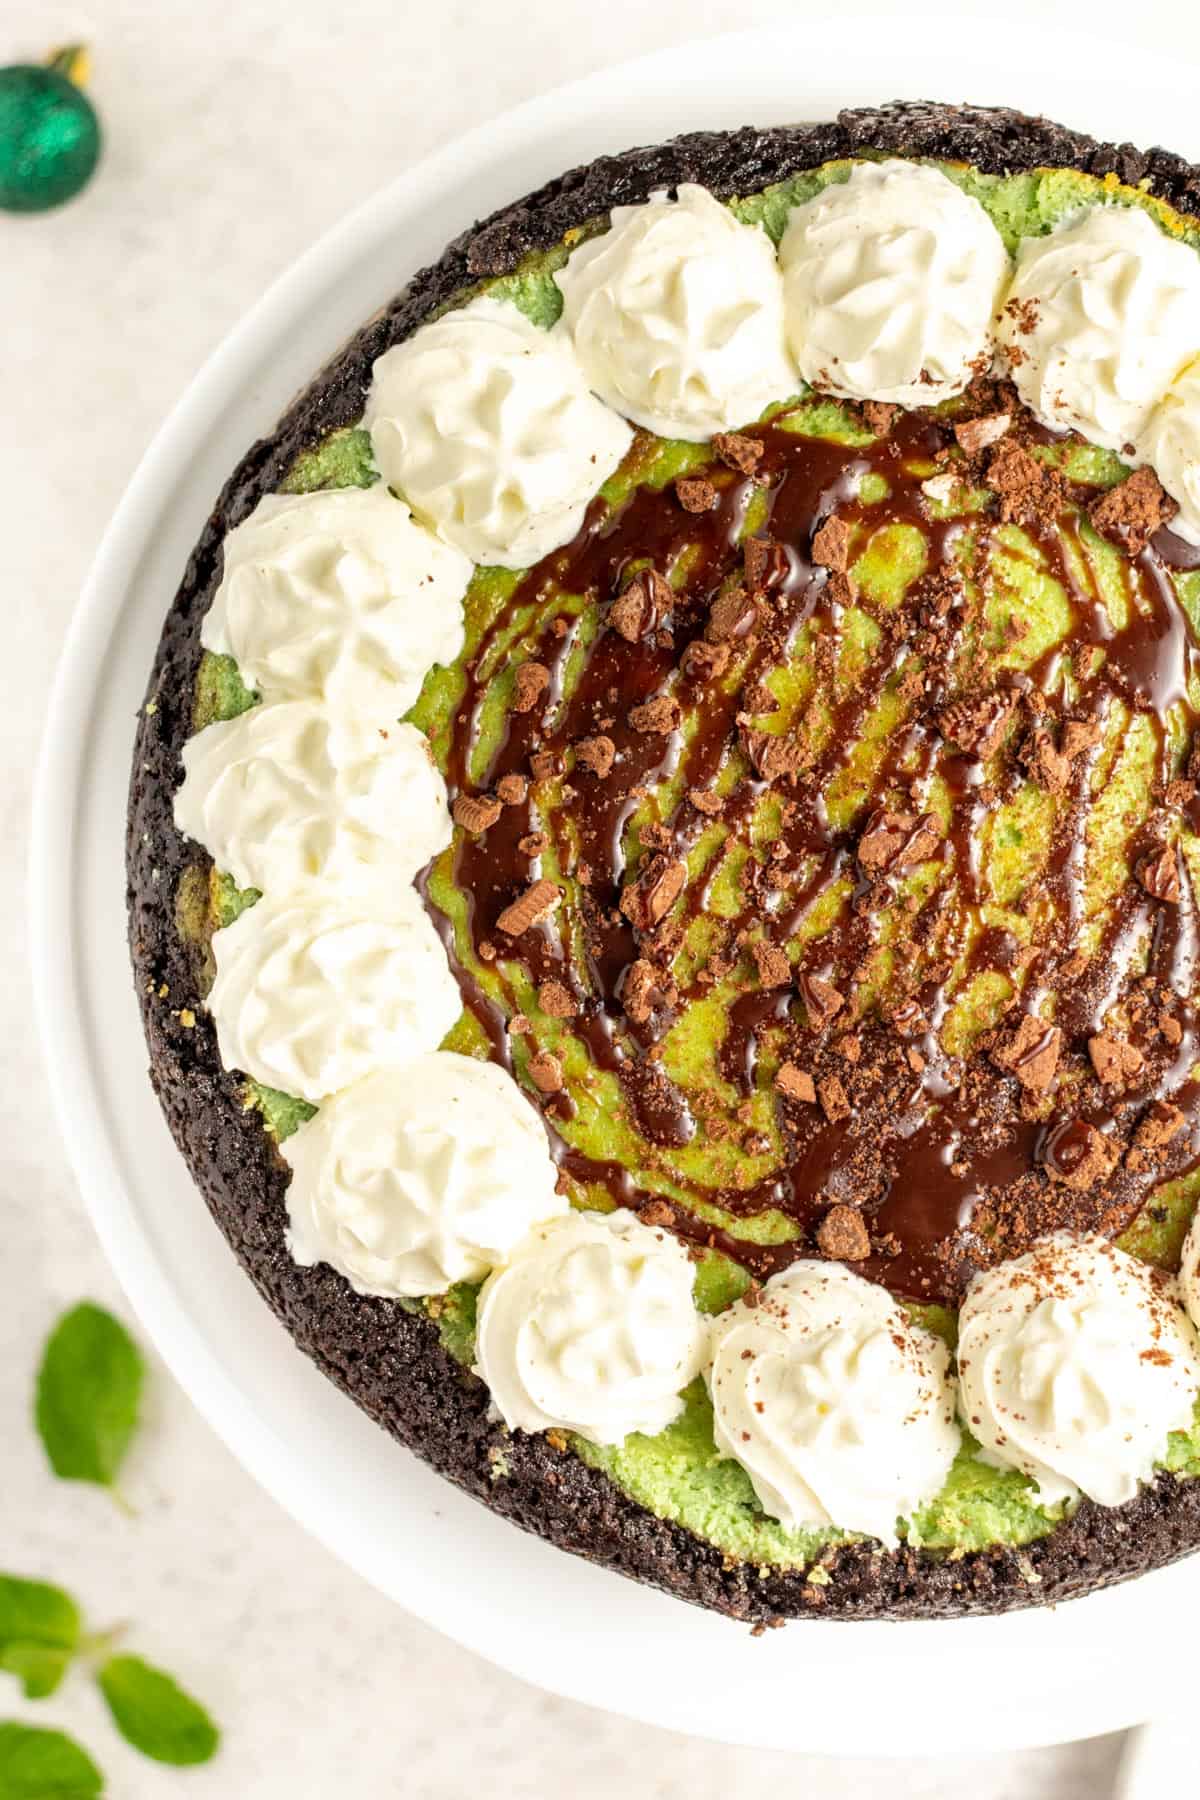 mint chocolate cheesecake covered with whipped cream and chocolate